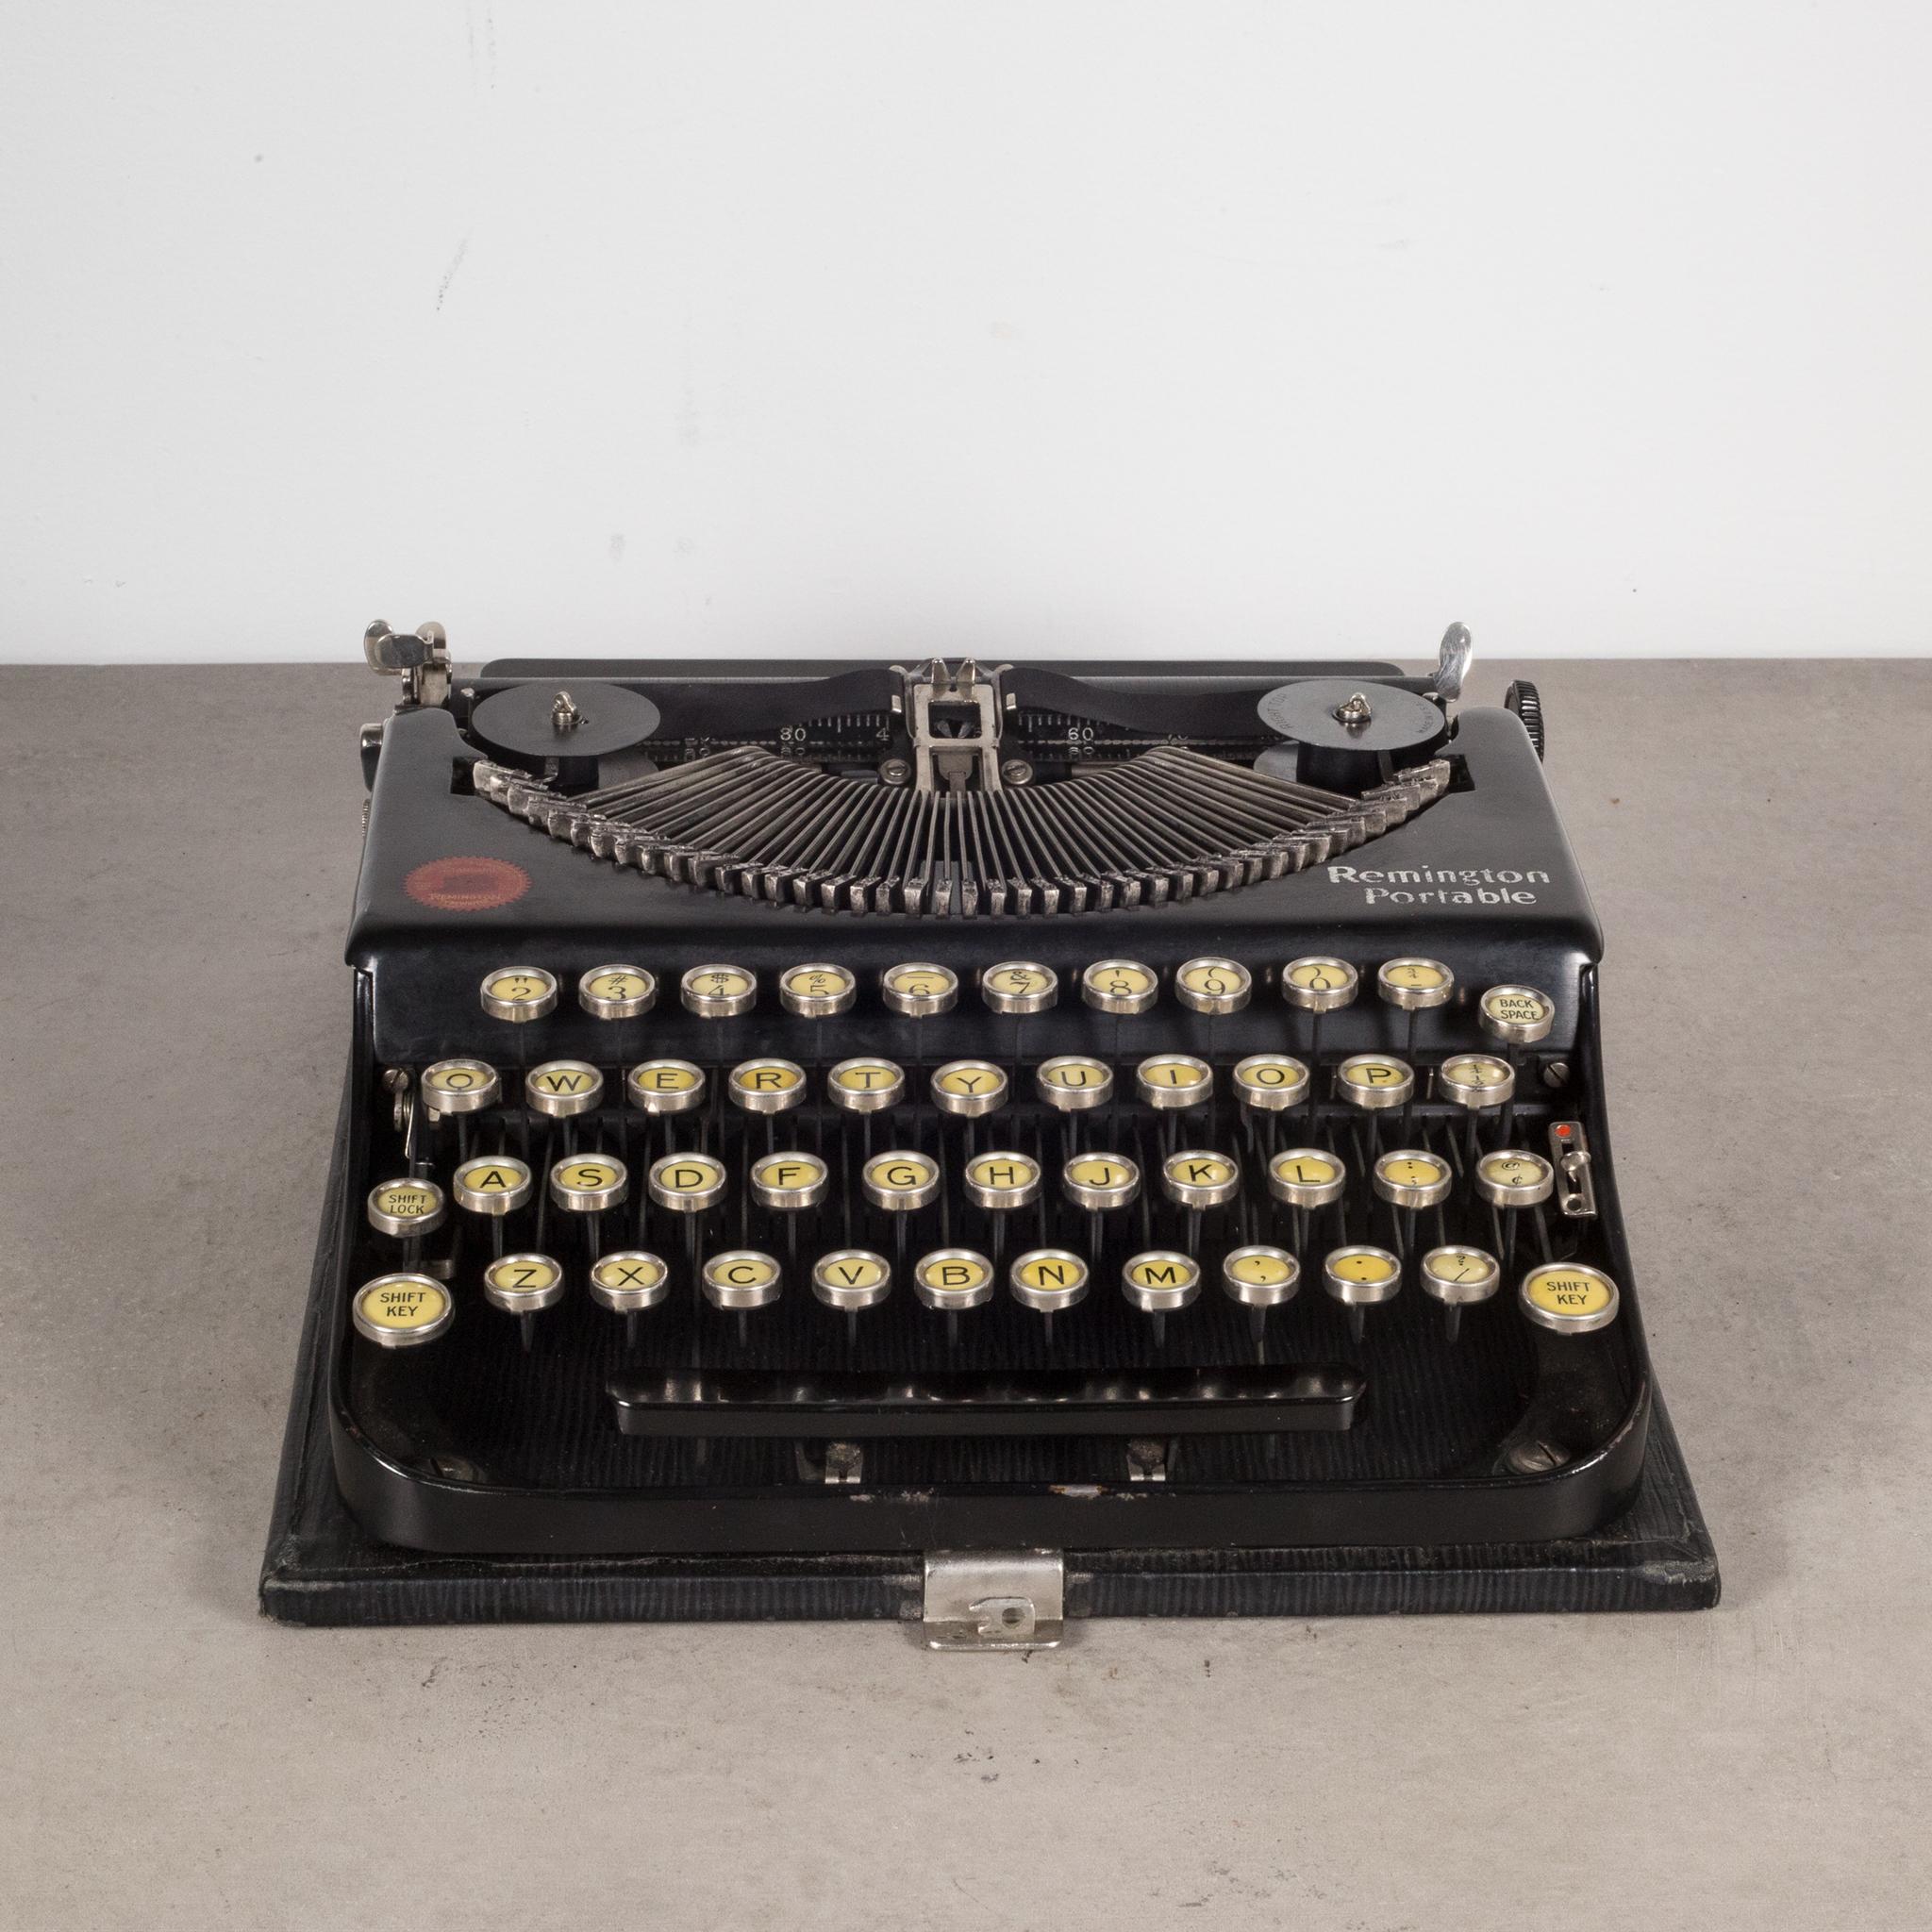 About

An original Remington Portable No. 1 Typewriter with original case. This typewriter features strikers that fold flat into the body and rise by turning a knob. The keys are nickle with black letters on a yellow background.  It has smooth